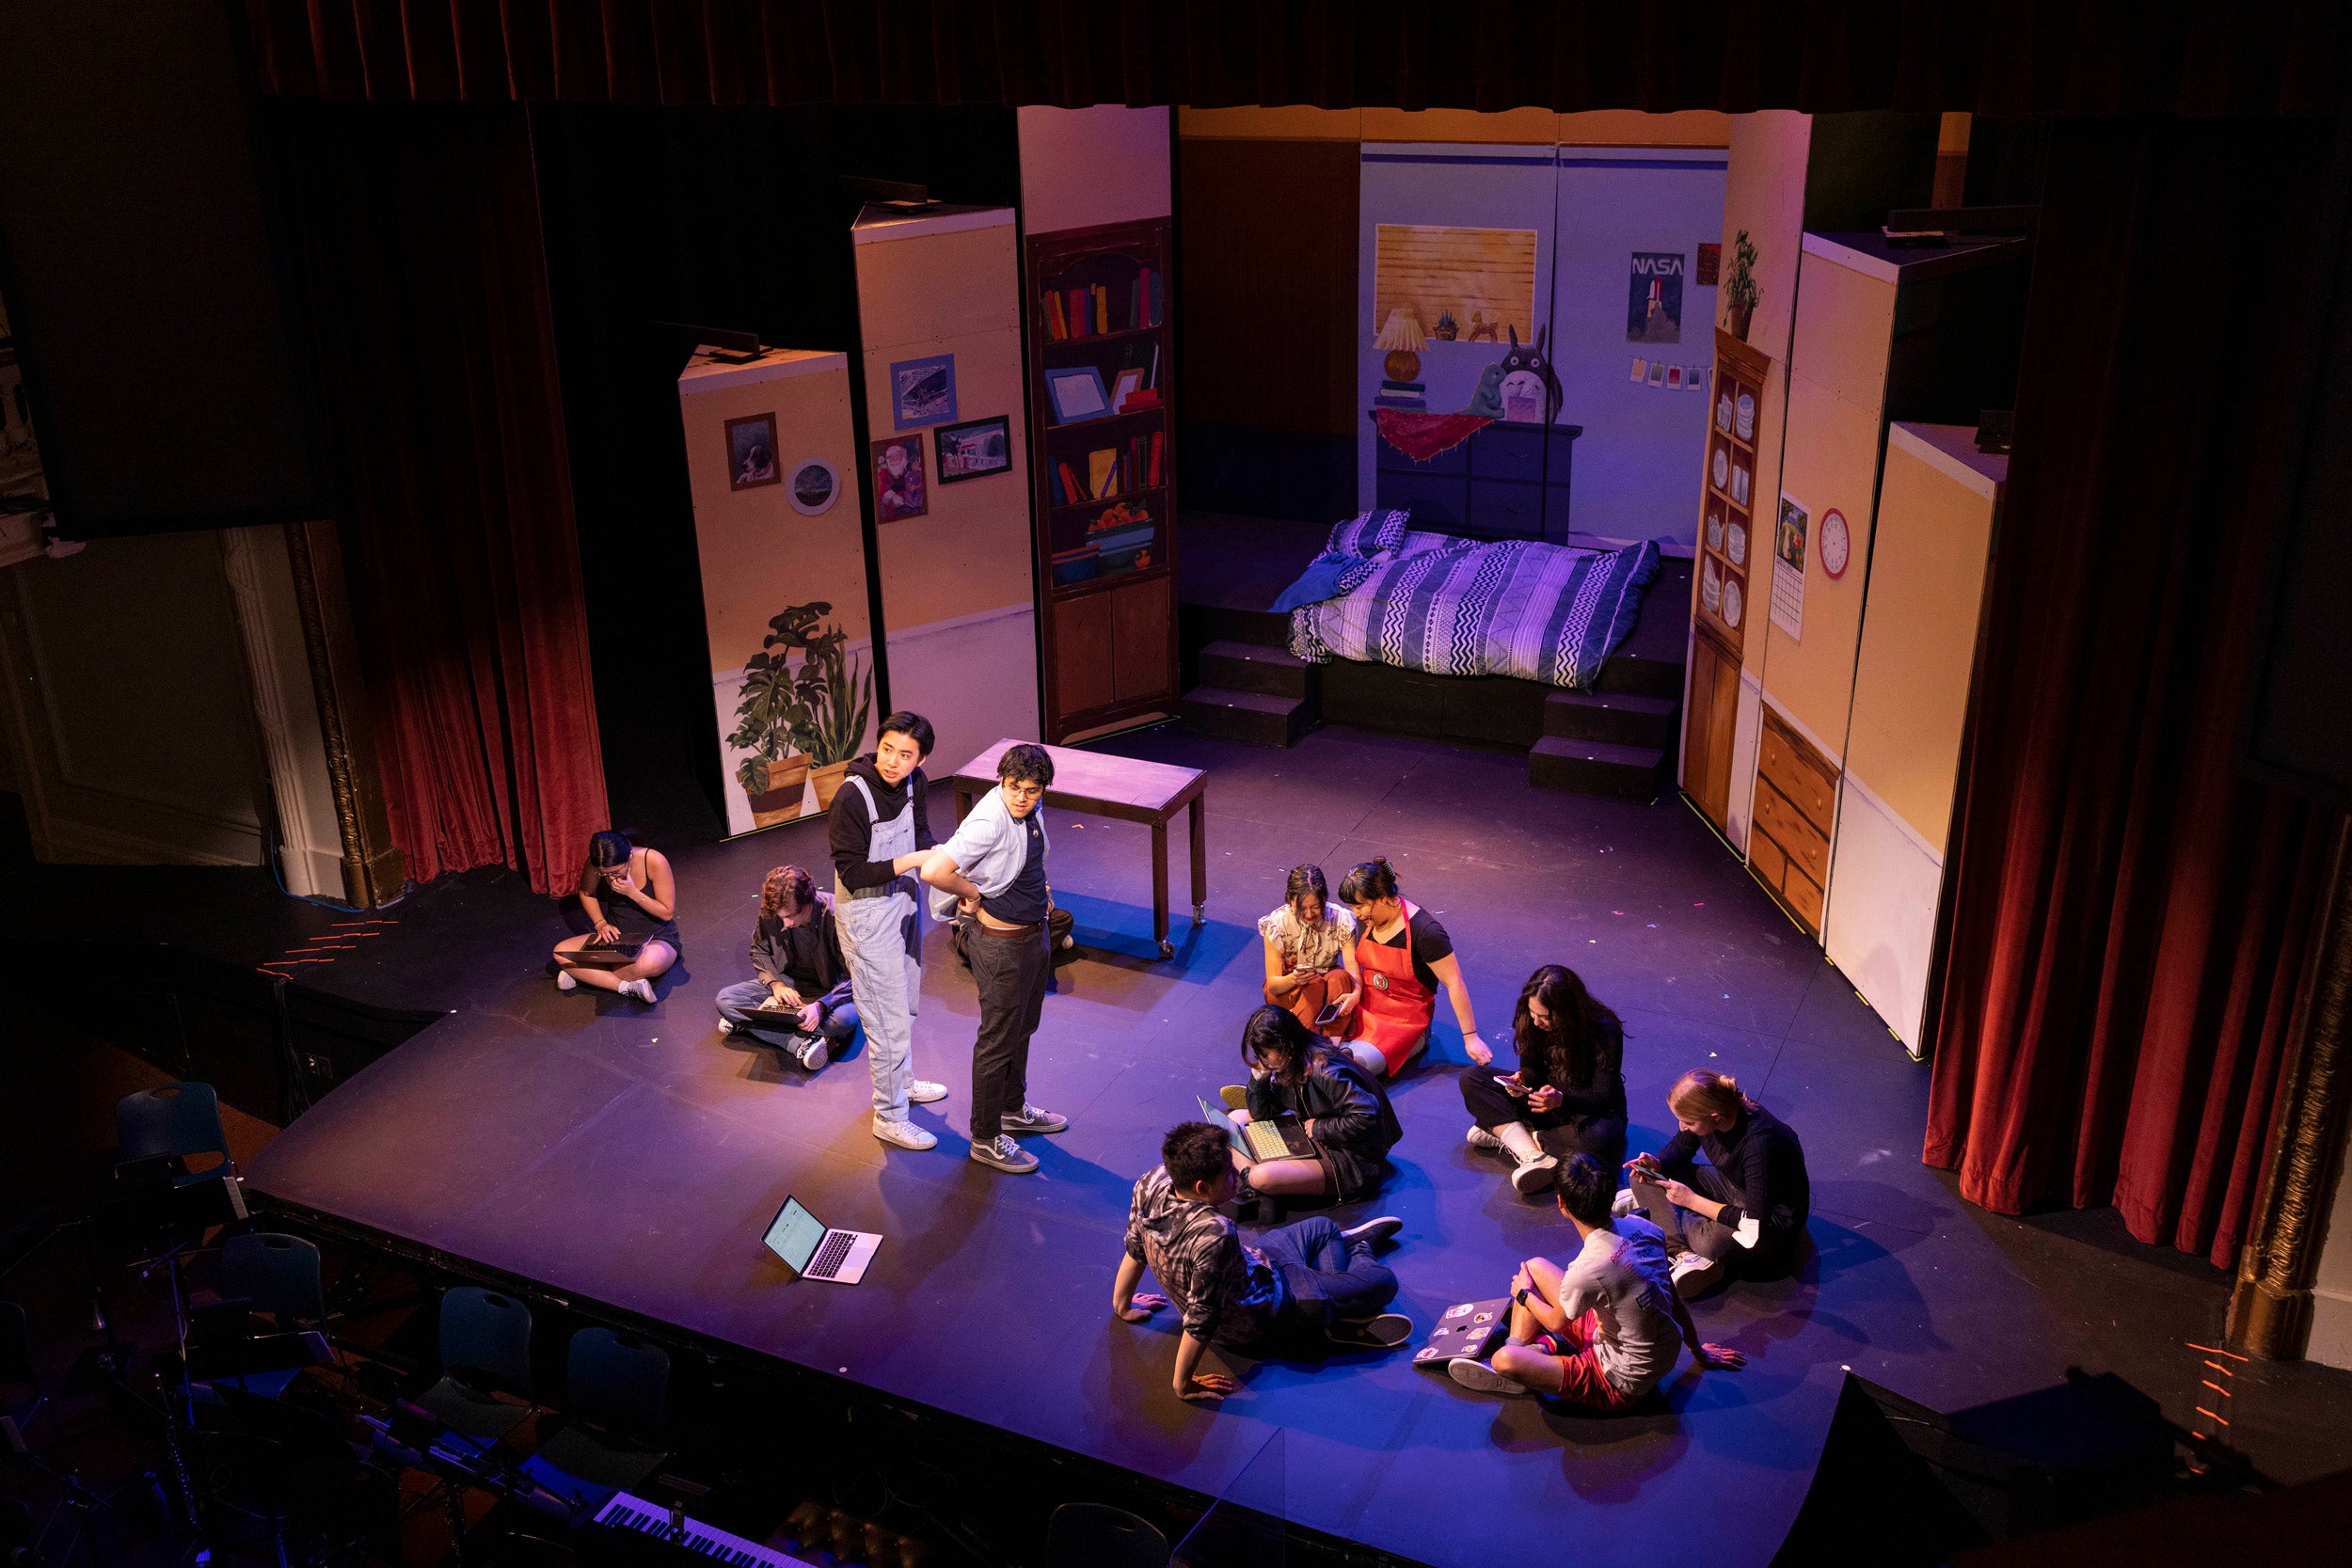 Overhead stage view of "OUT" at Aggassiz Theater.